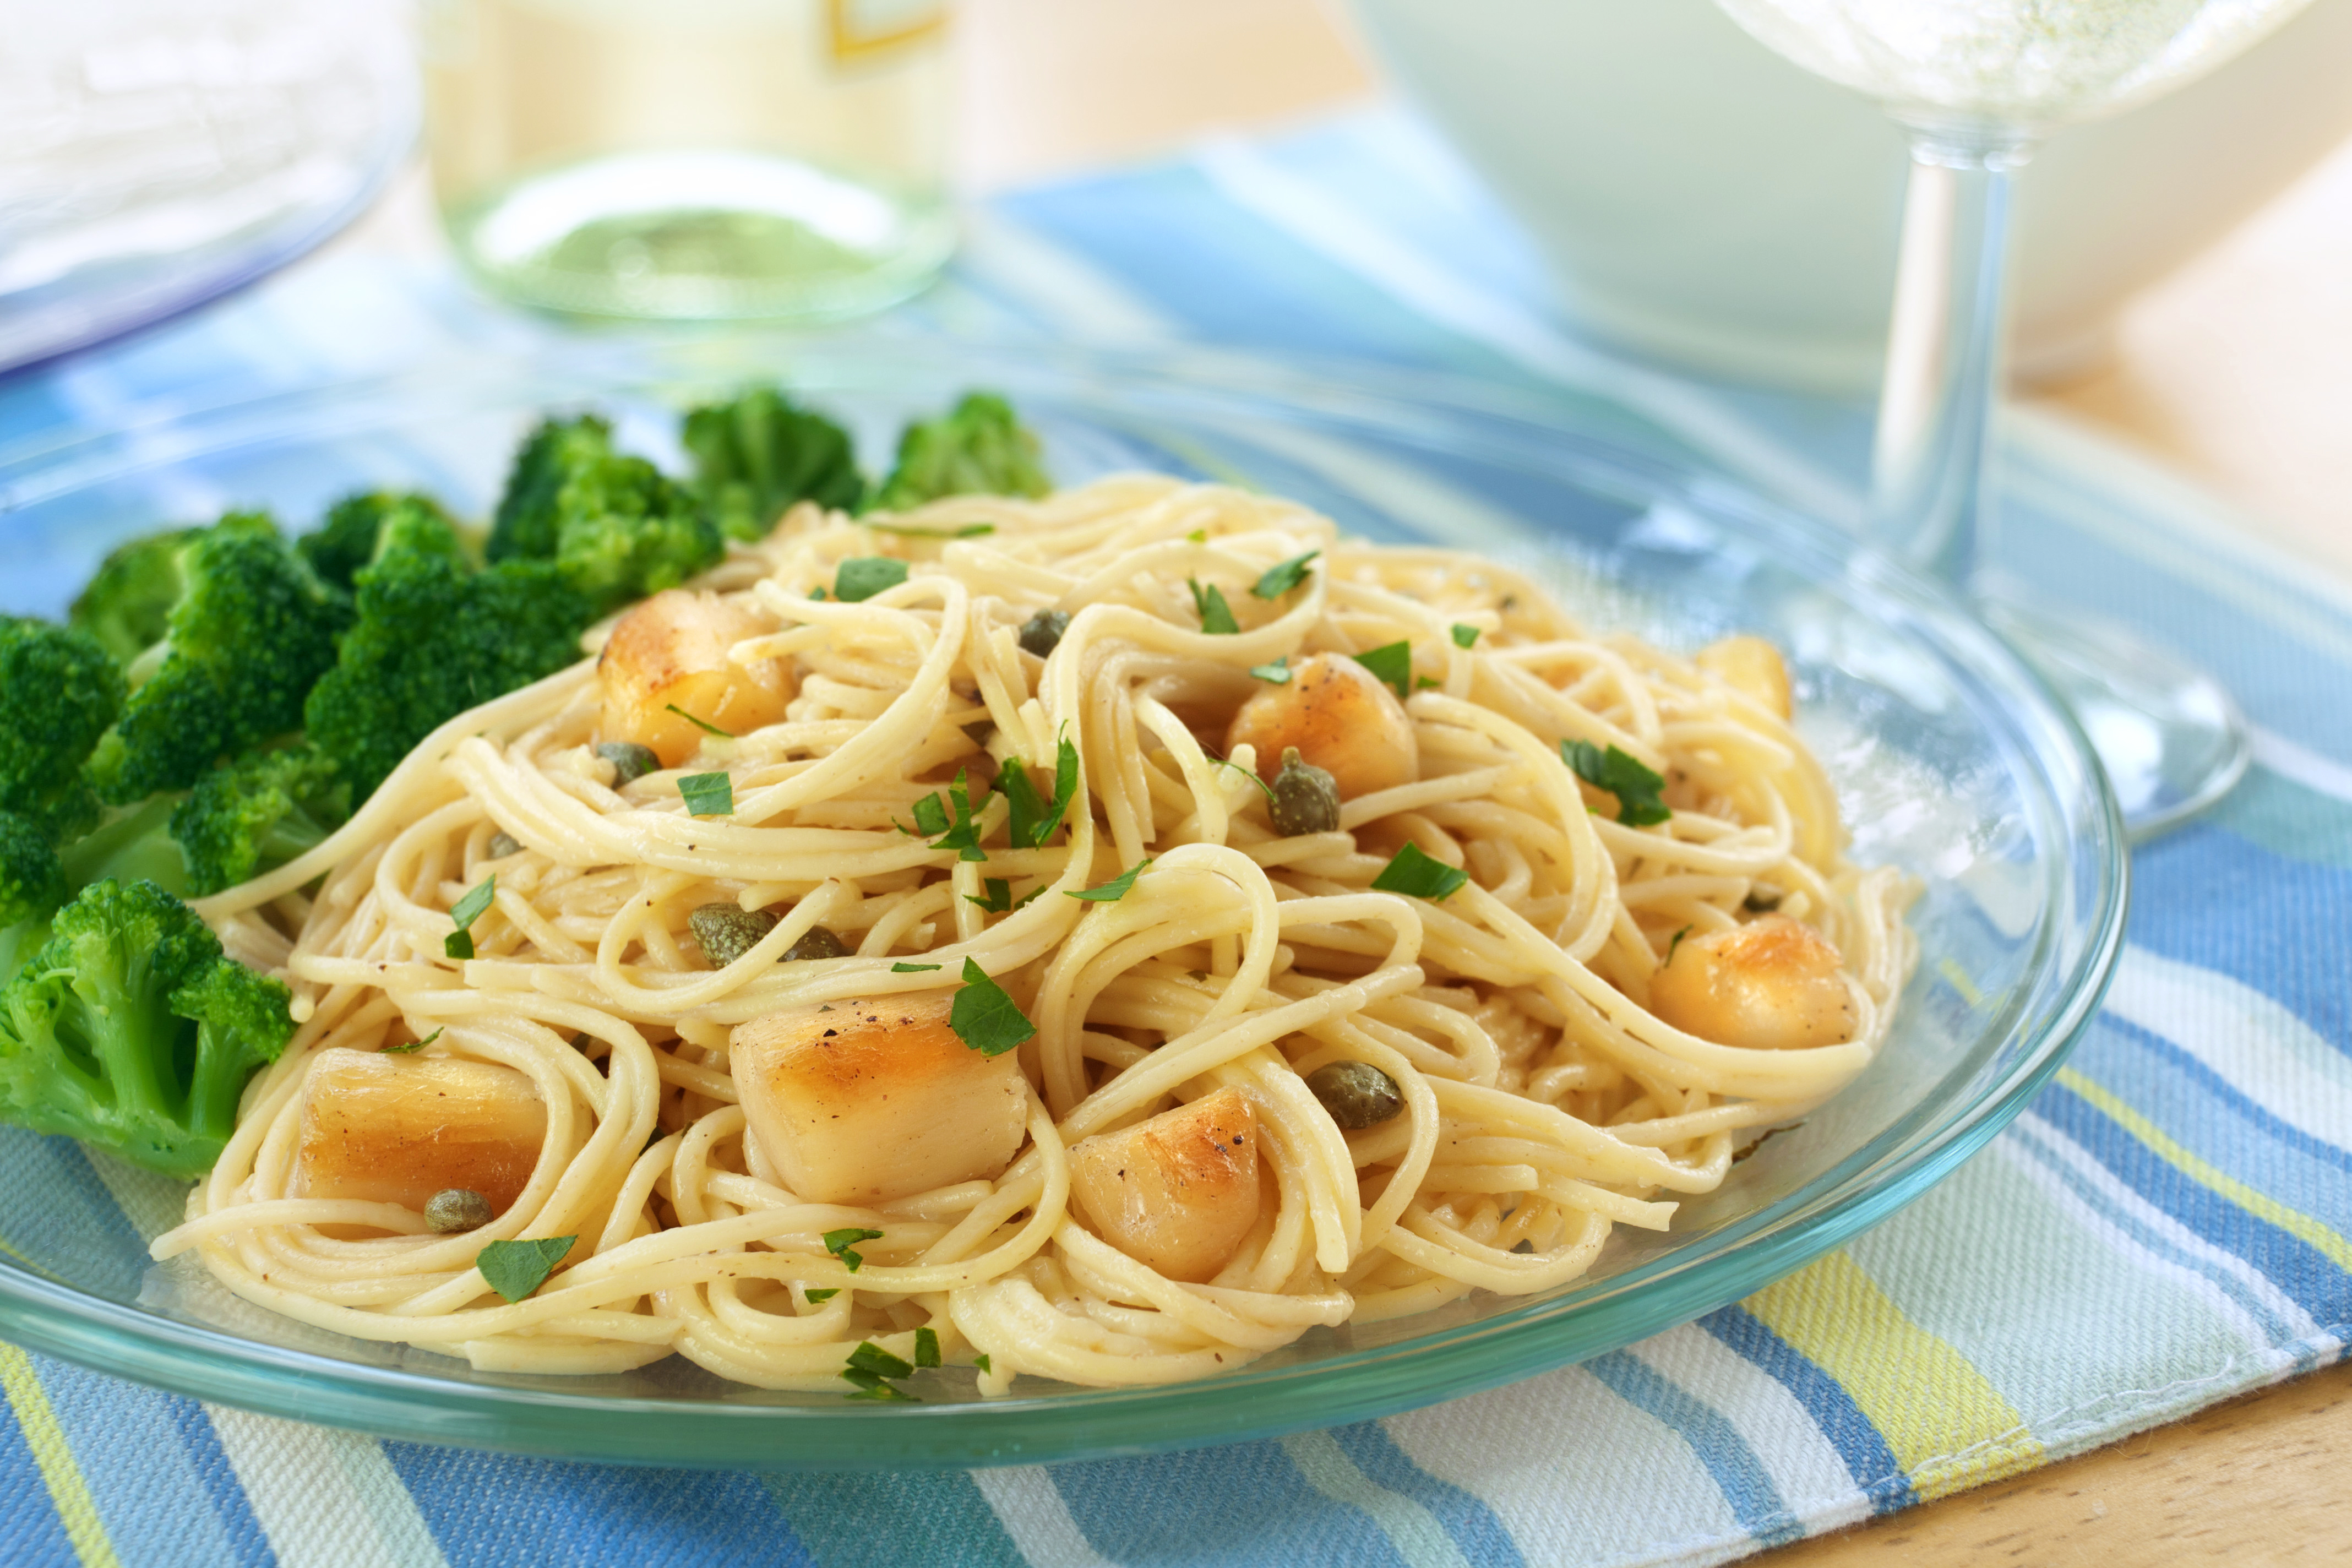 Scallop Piccata on Angel Hair